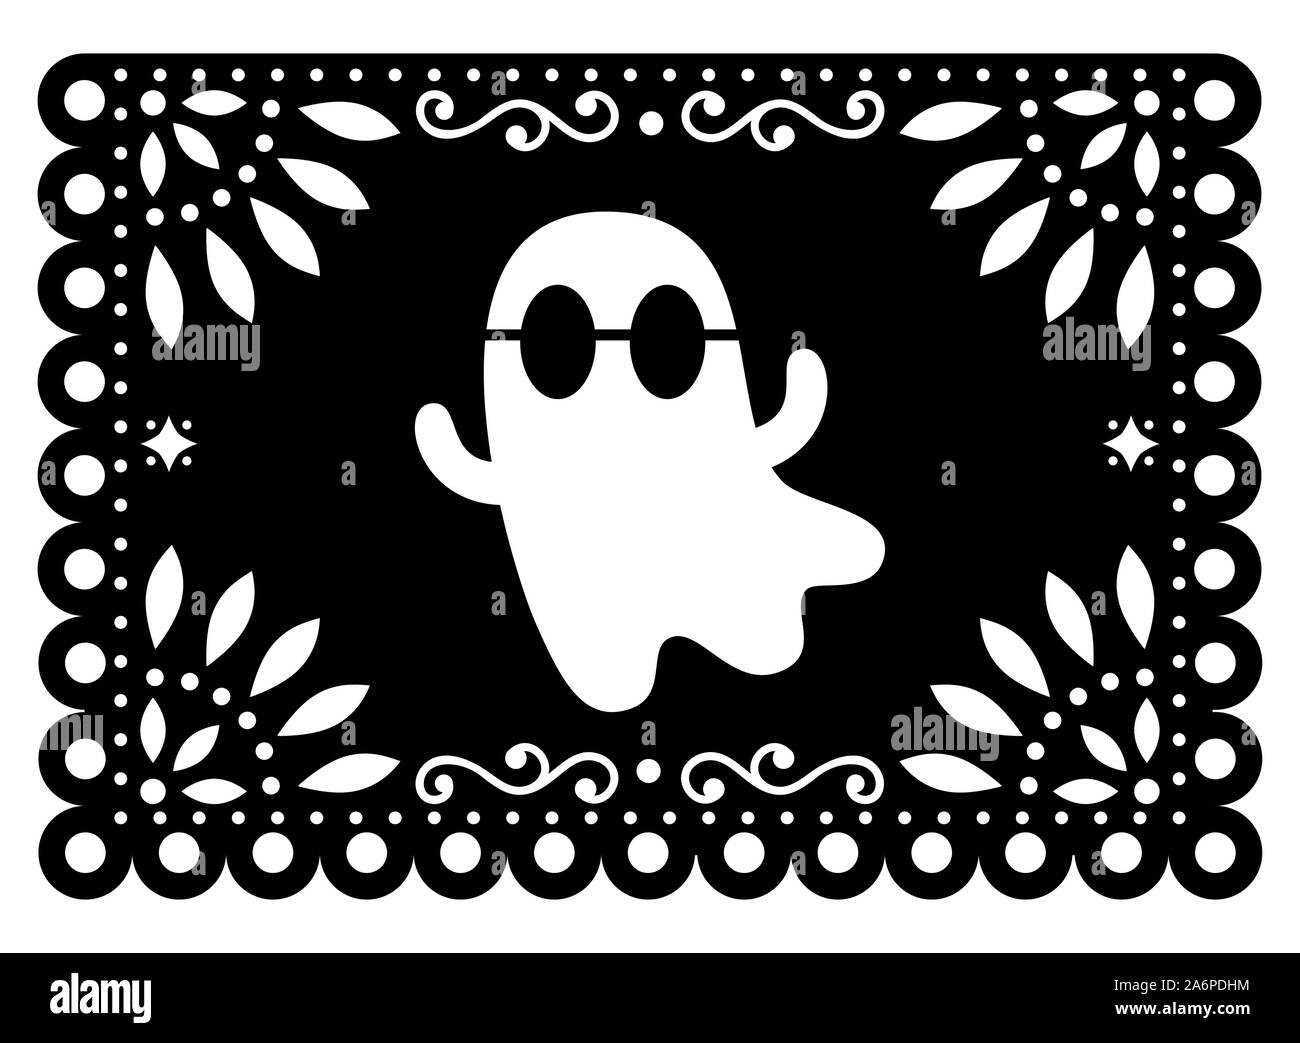 Halloween ghost Papel Picado design, Mexican paper cut out garland background with flowers and geometric shapes Stock Vector